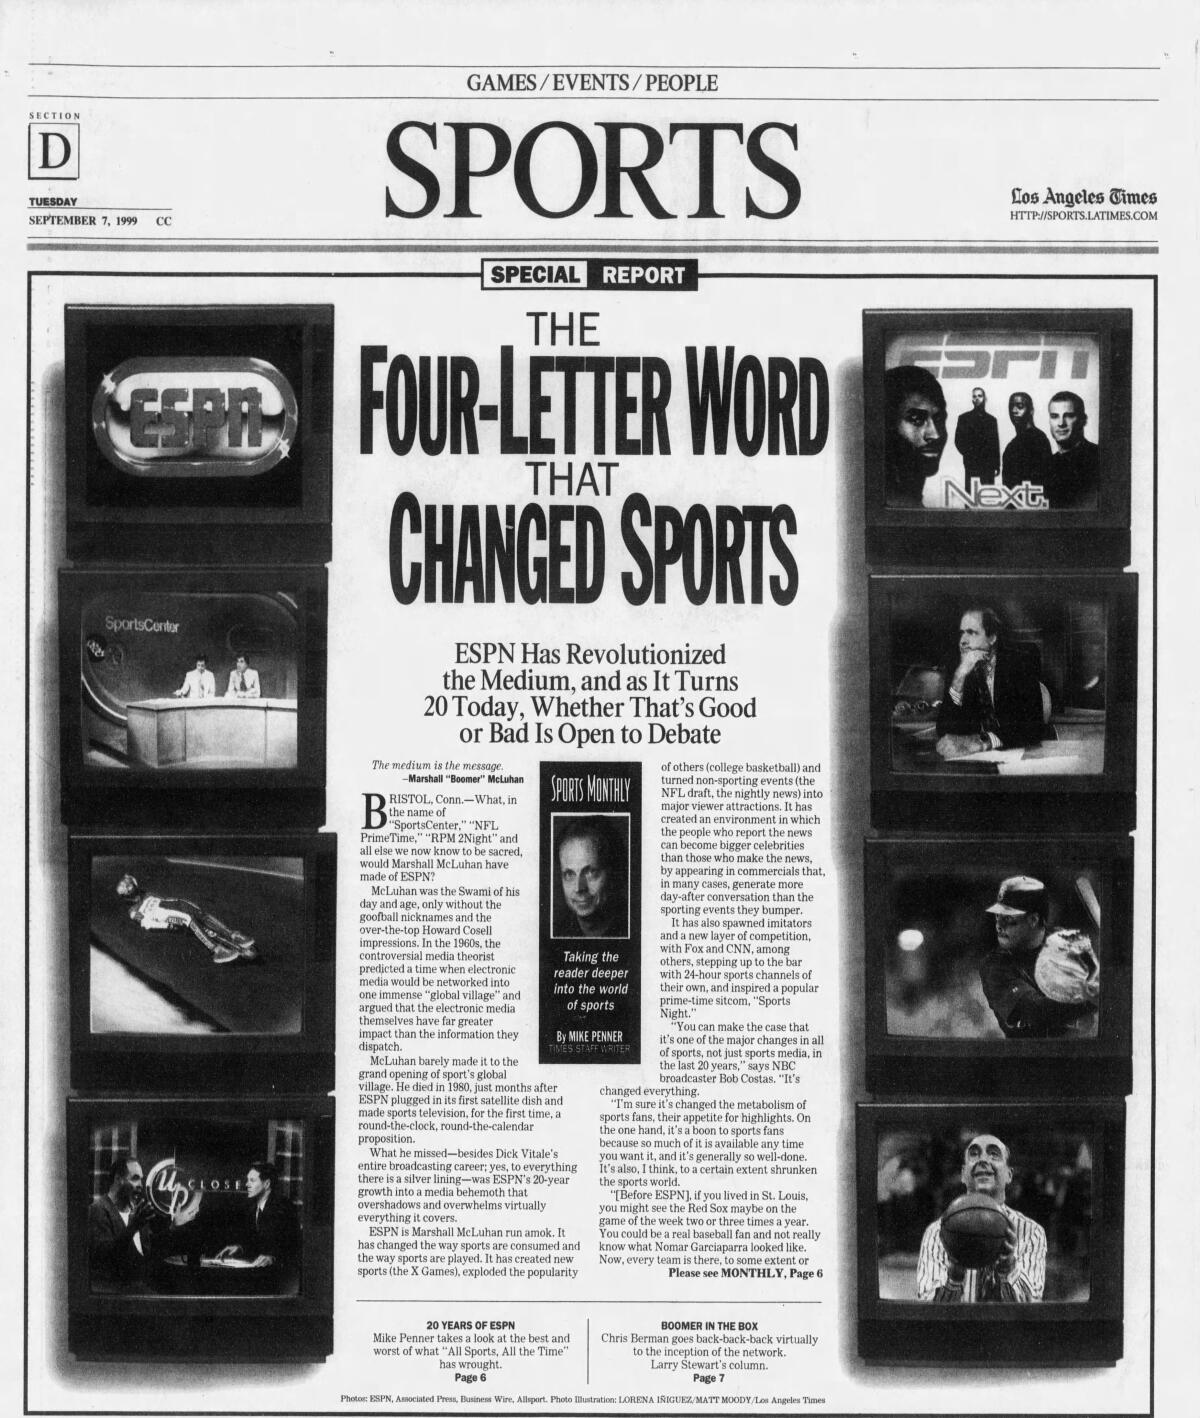 The 1999 print edition of the L.A. Times featured a 20-year lookback on the advent of ESPN.